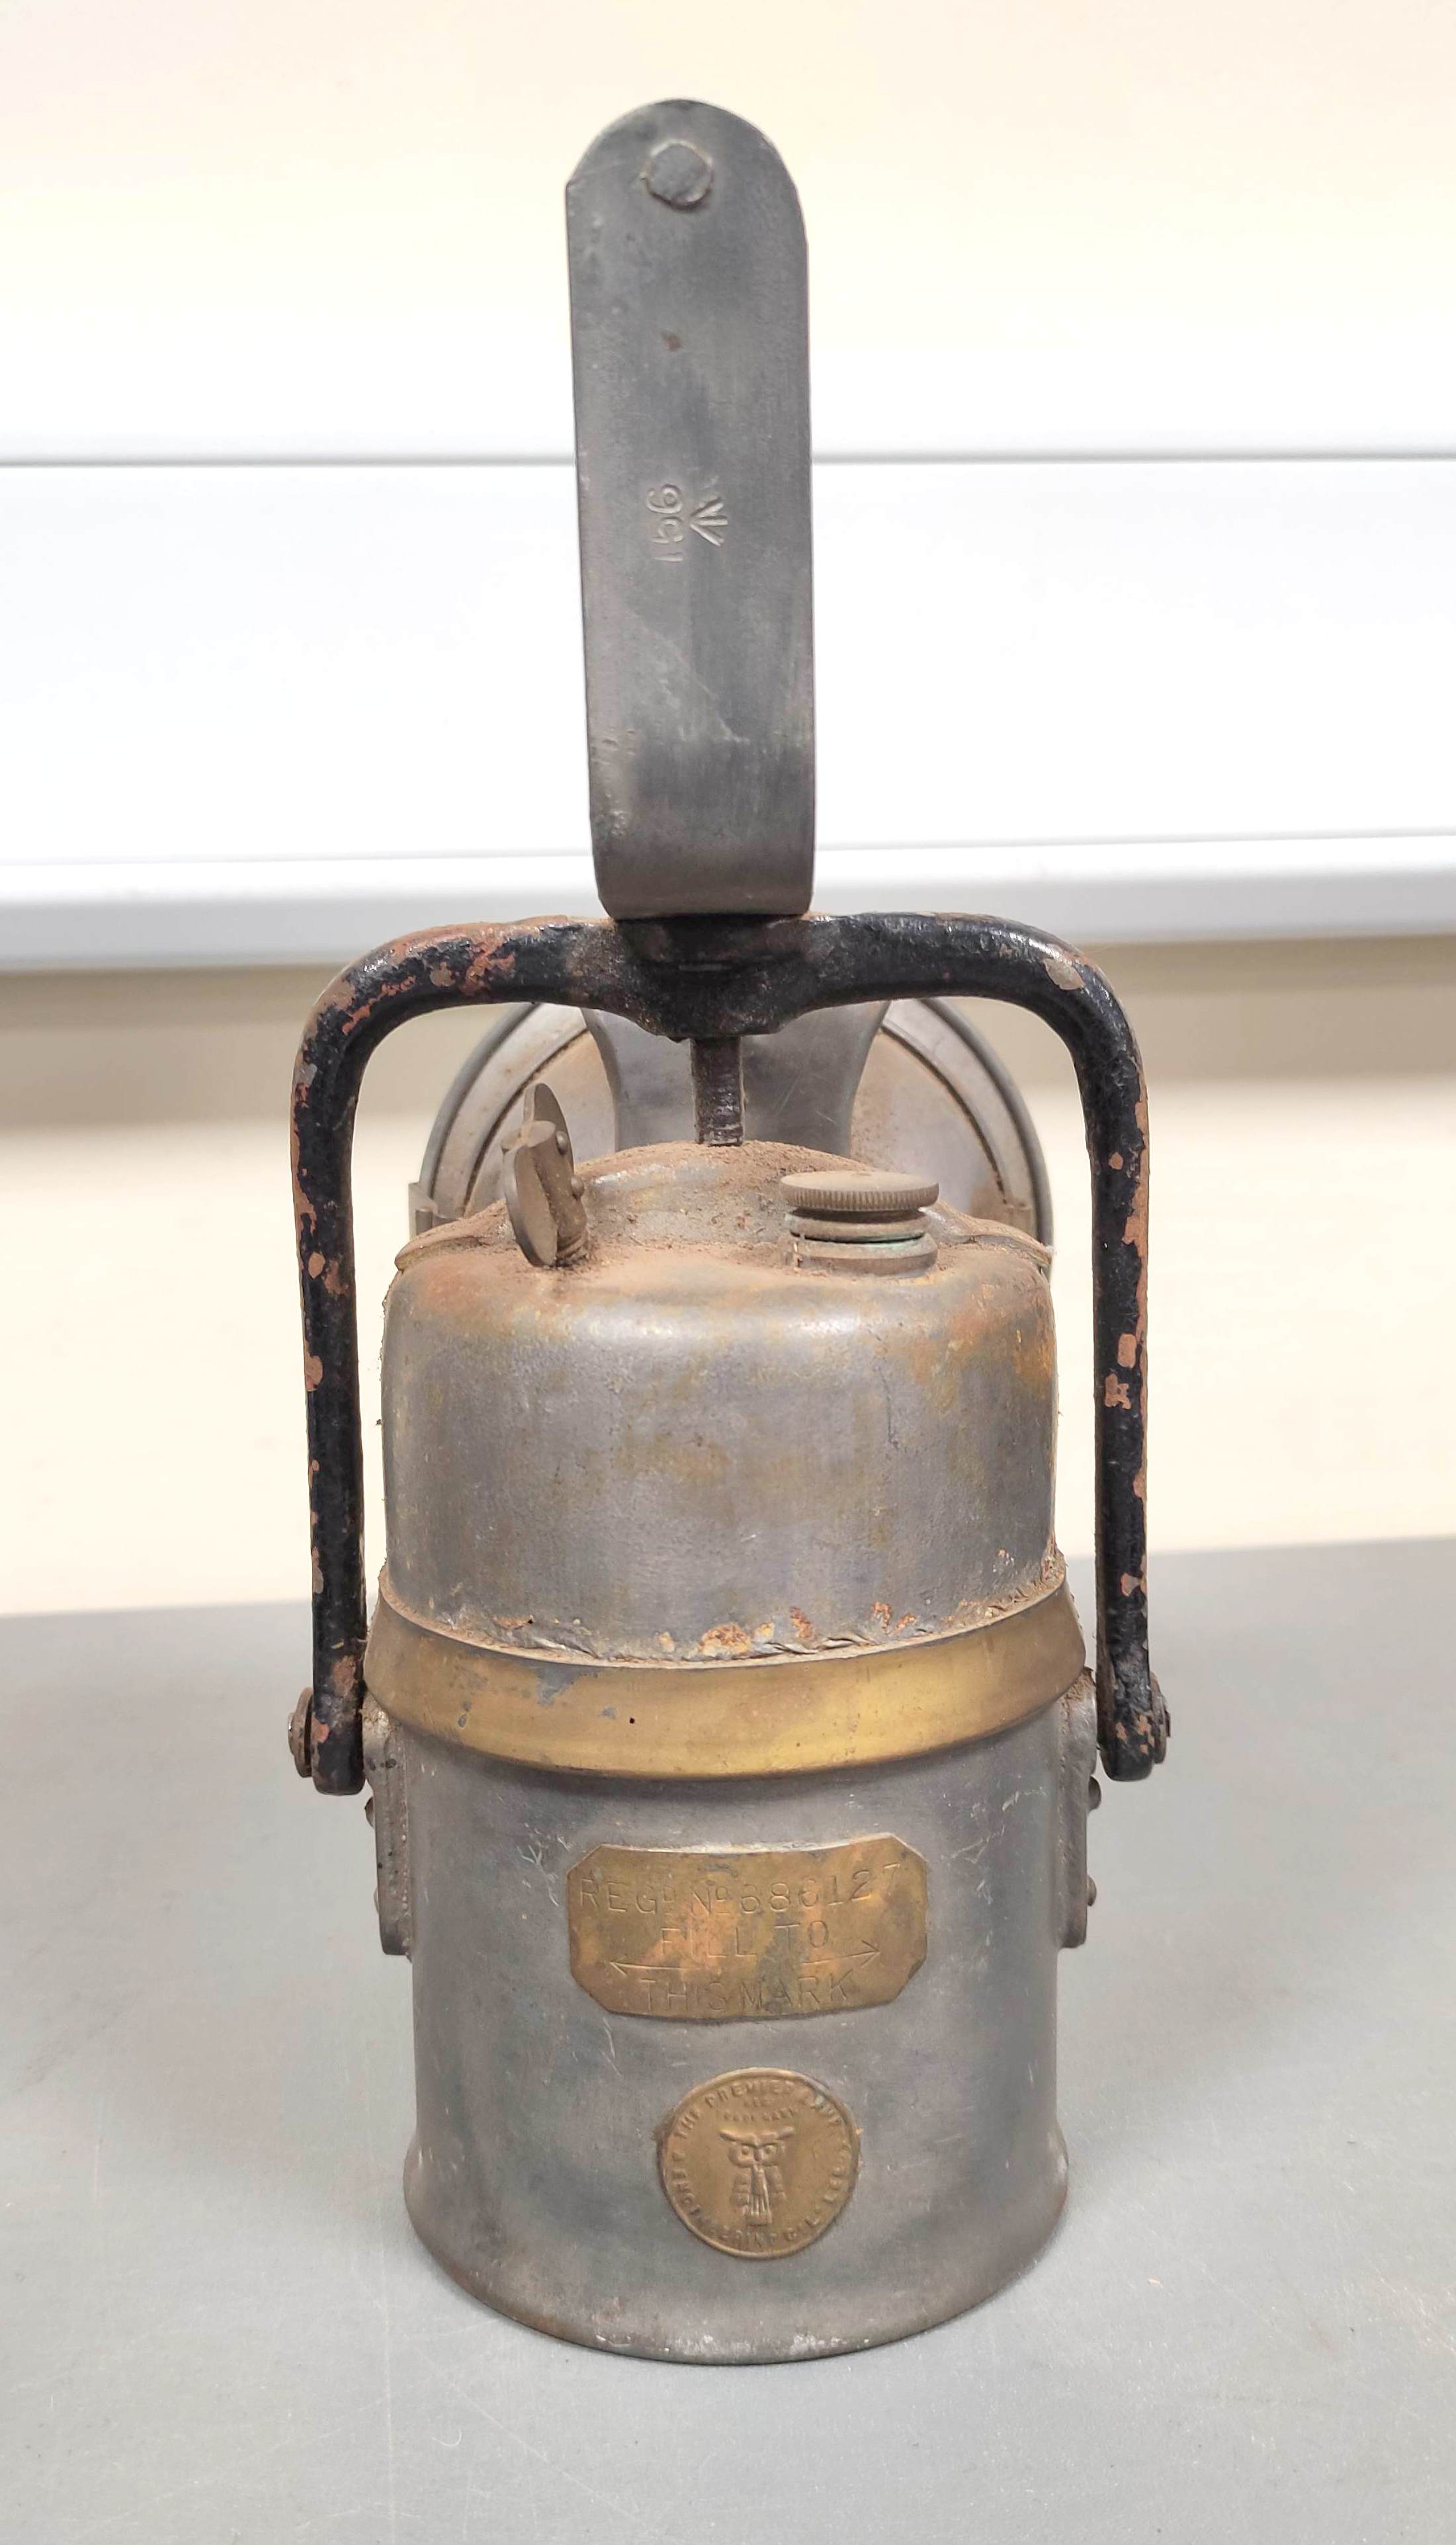 Two carbide Lamps by The Premier Lamp and Engineering Co Leeds with pewter bodies and wooden carry - Image 4 of 6